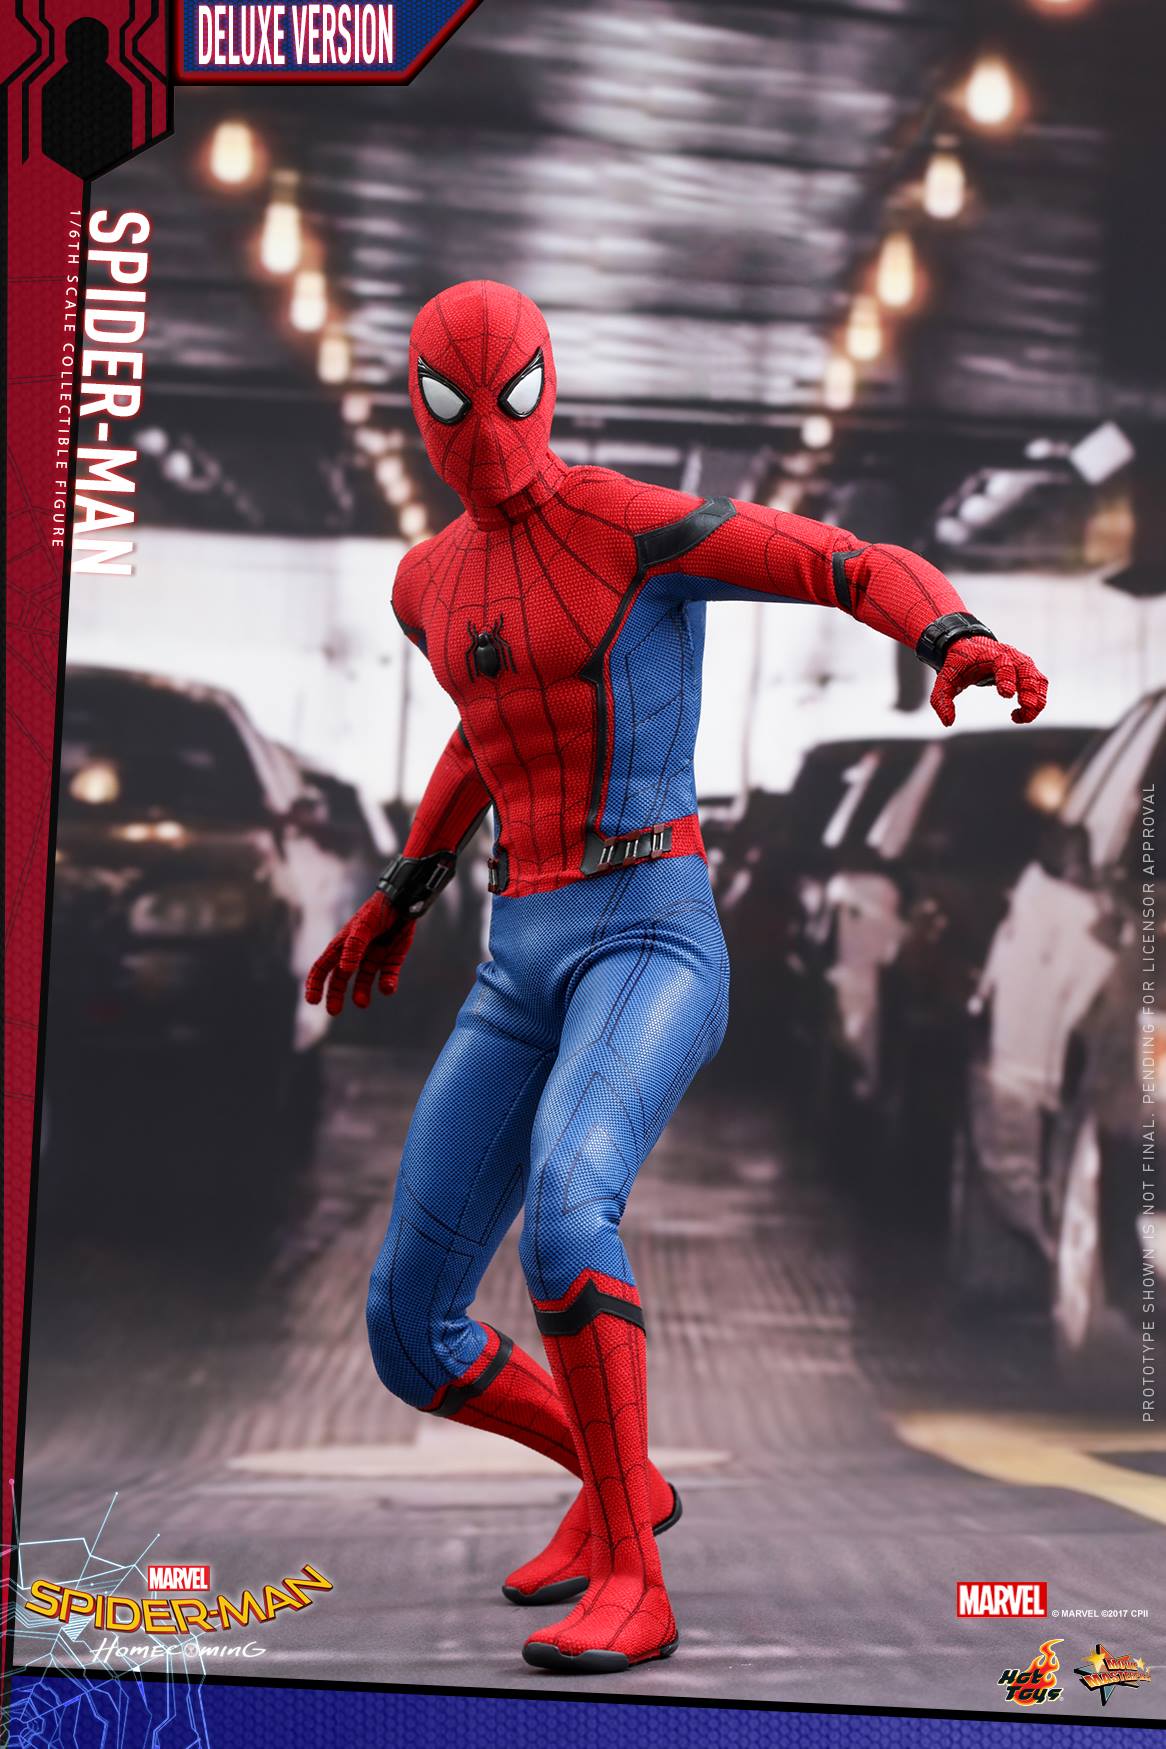 Spider-Man: Homecoming Hot Toy (Deluxe Version)